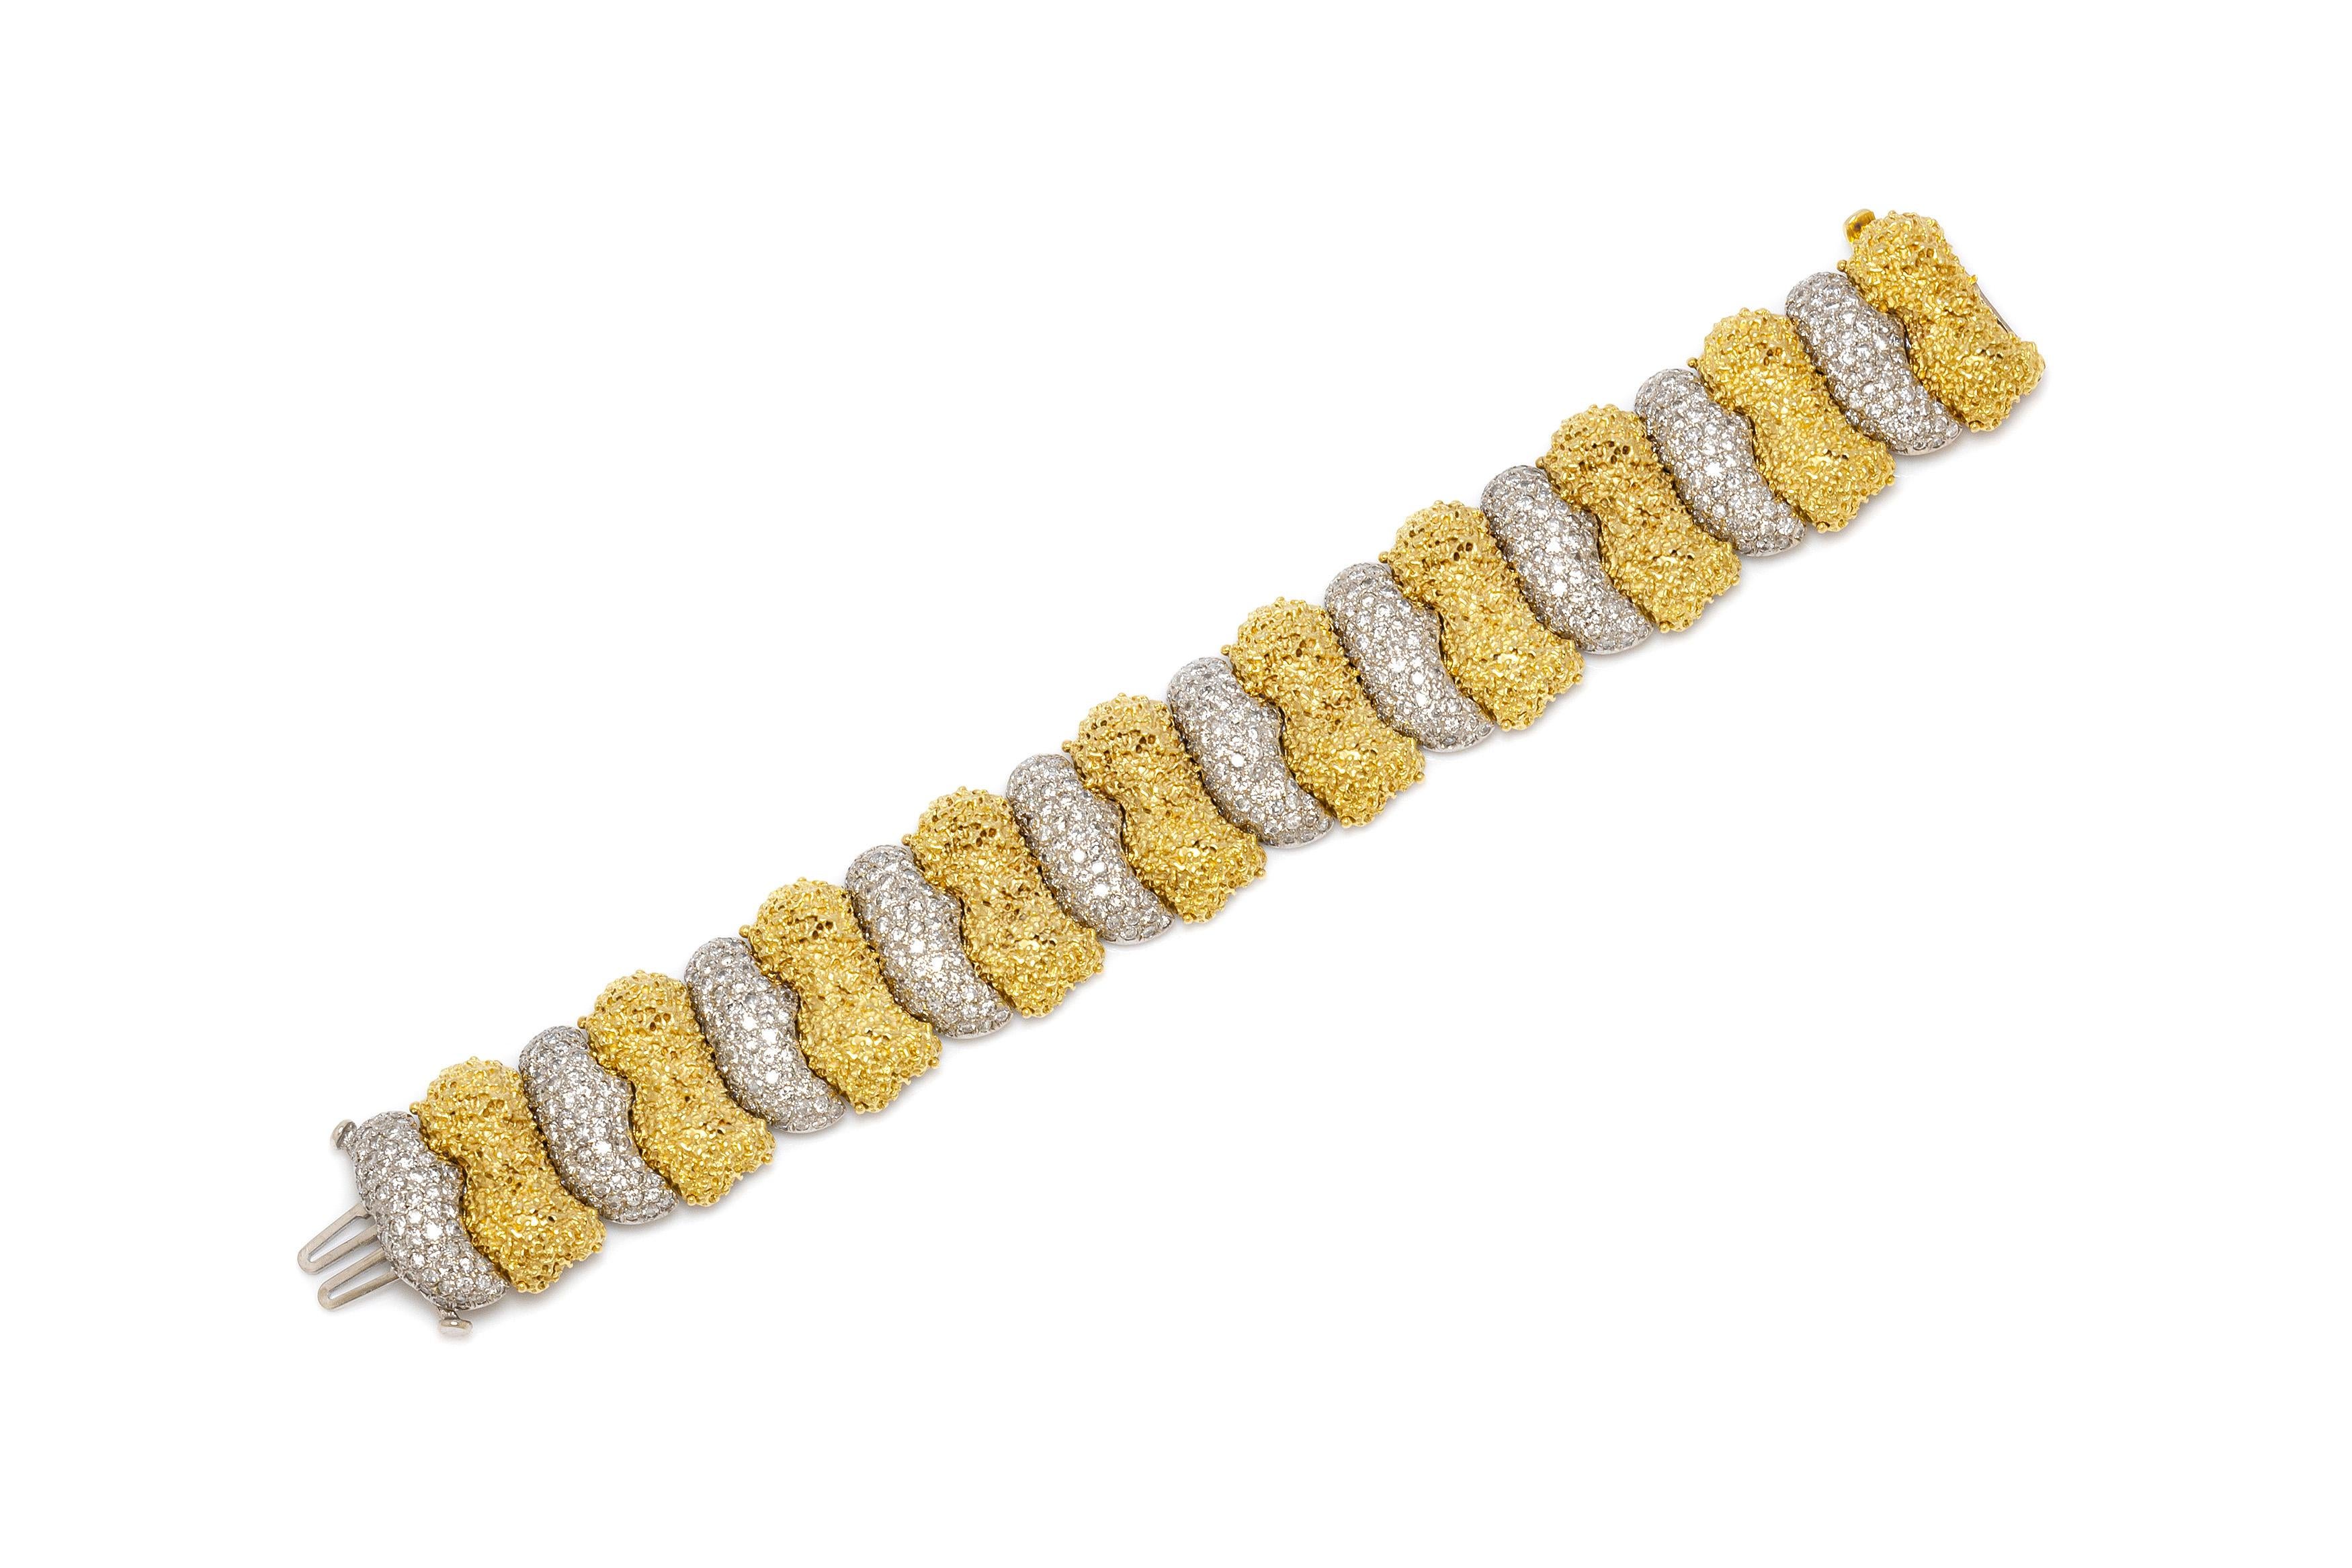 Bracelet finely crafted in 18k yellow and white gold with diamonds weighing a total of 15.00 carat. The length of bracelet is 7.5 inch / 19 cm. Circa 1970's.